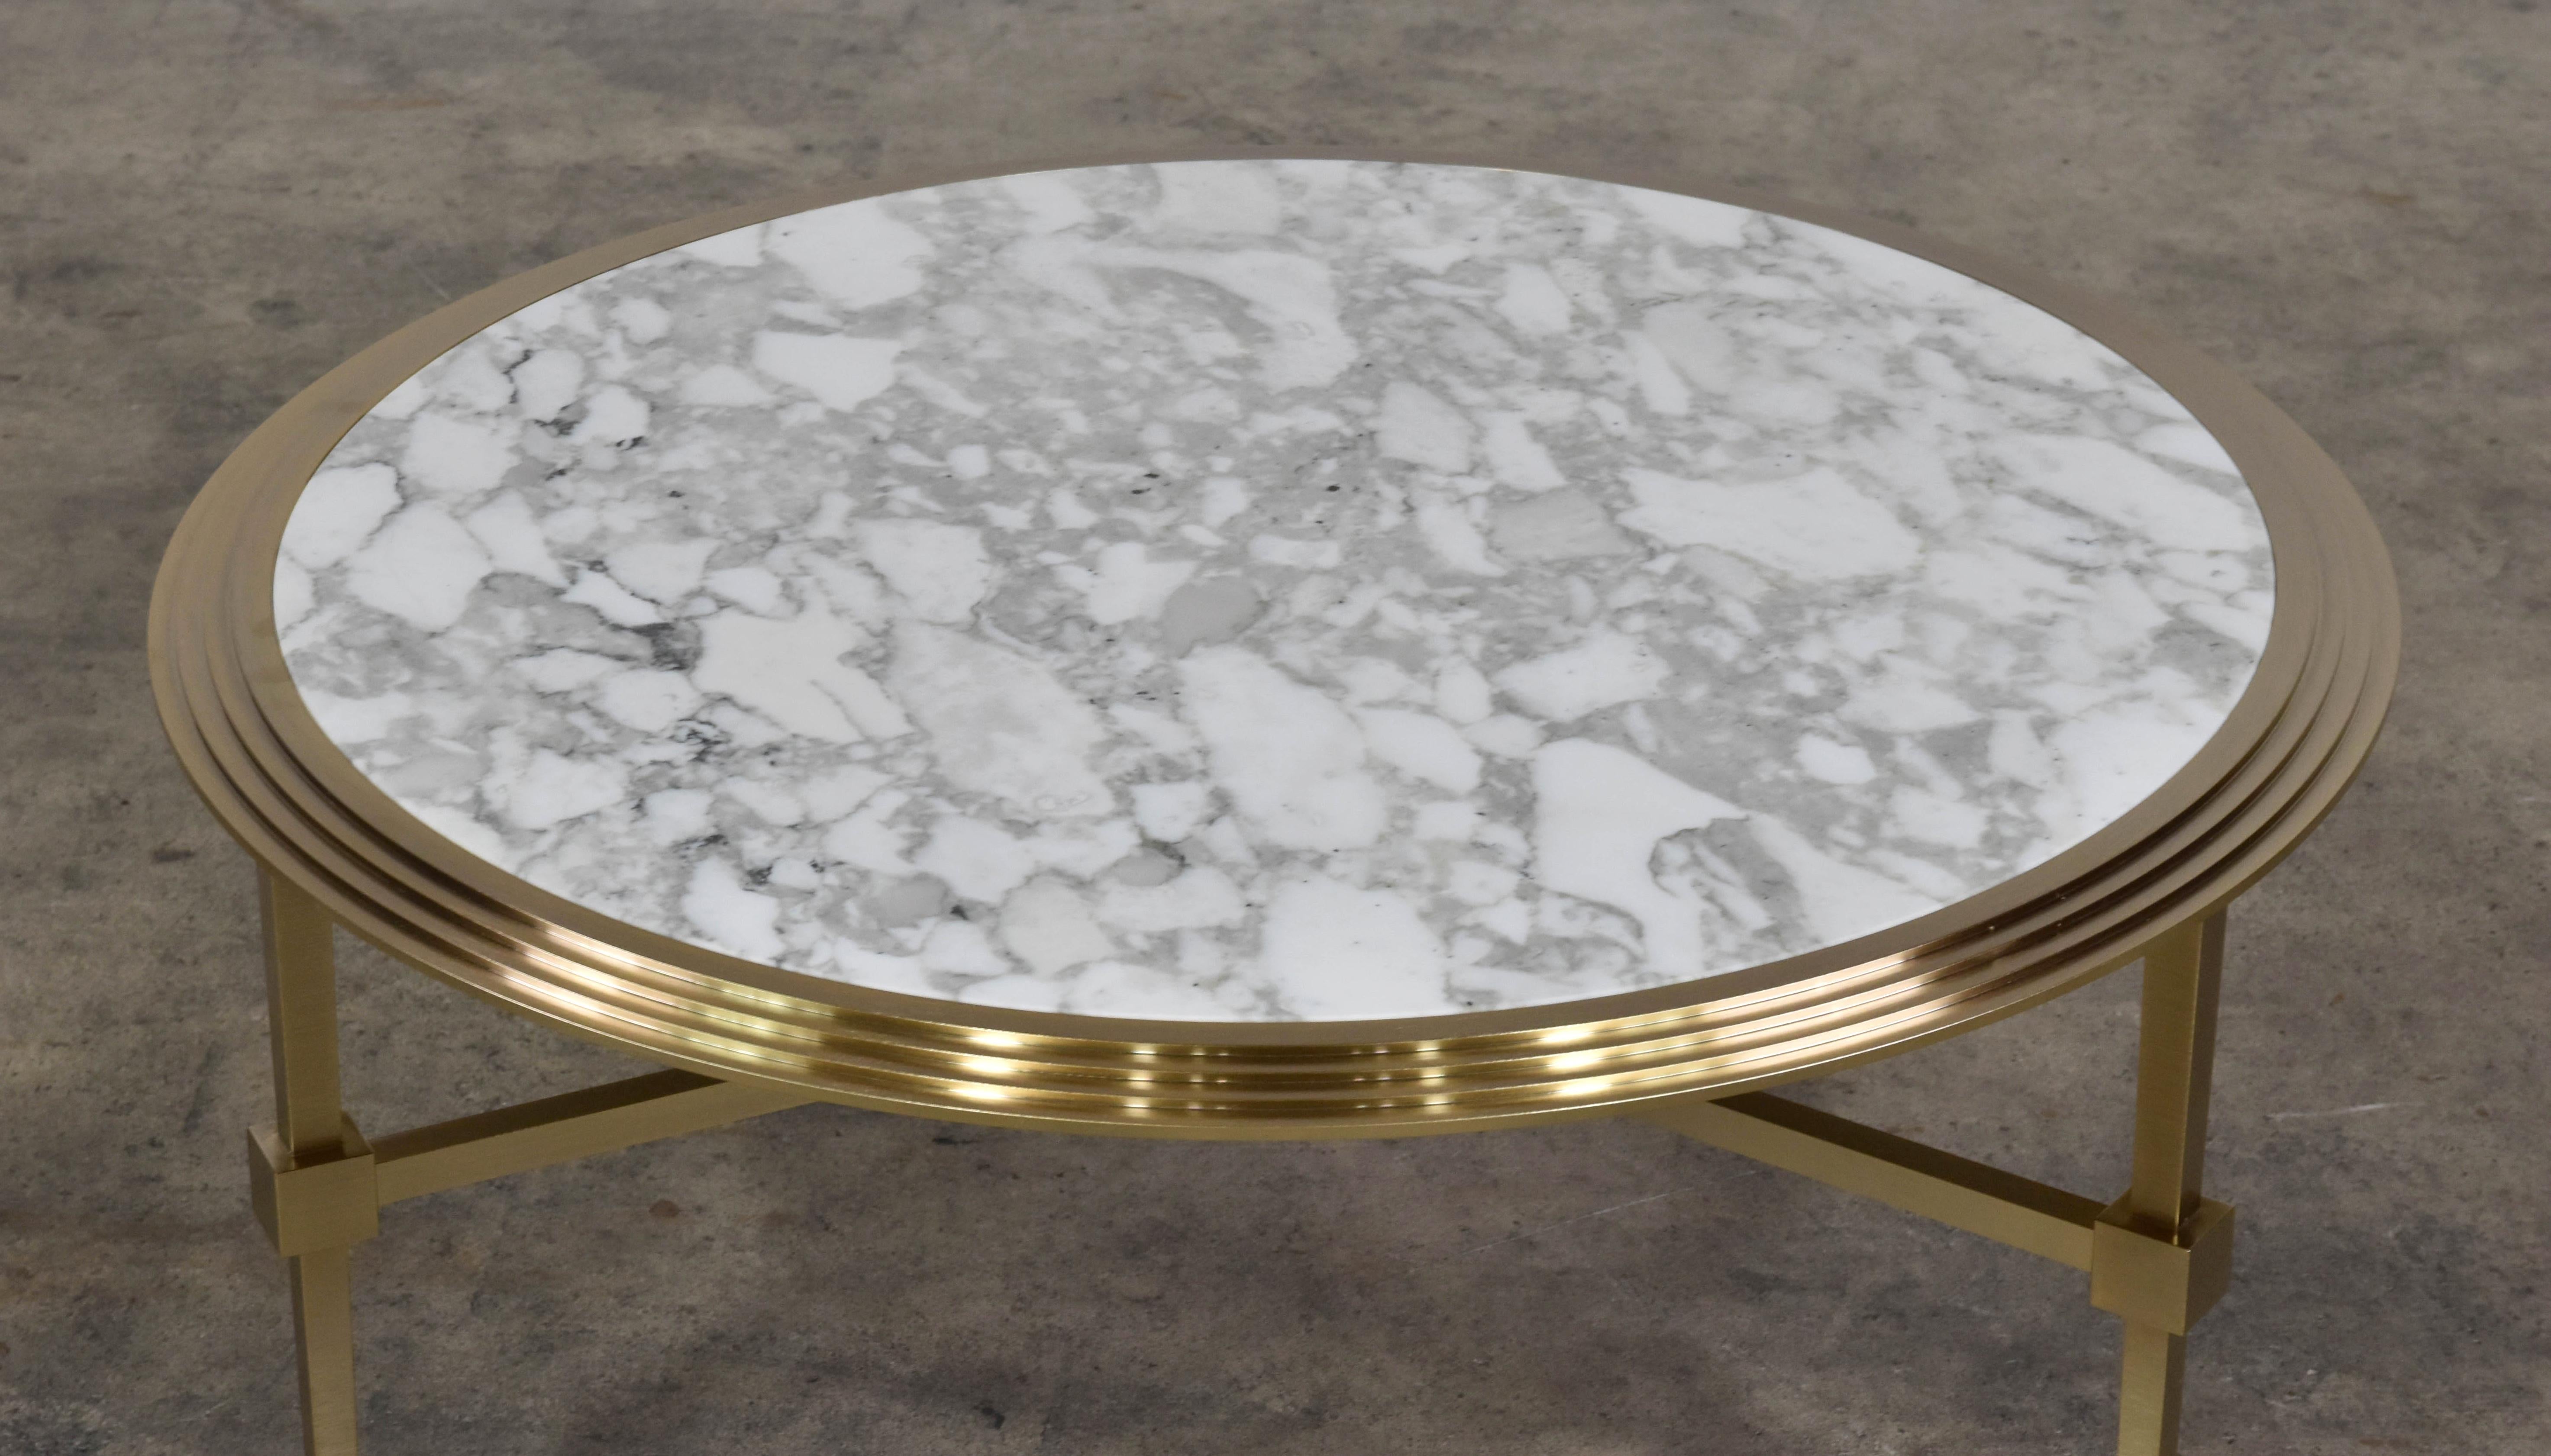 The Saturno coffee tables are a series of round coffee tables available in different heights and dimensions to create layered compositions. Base color is brushed bronze with Carrara marble top. Measure: D 35.
 